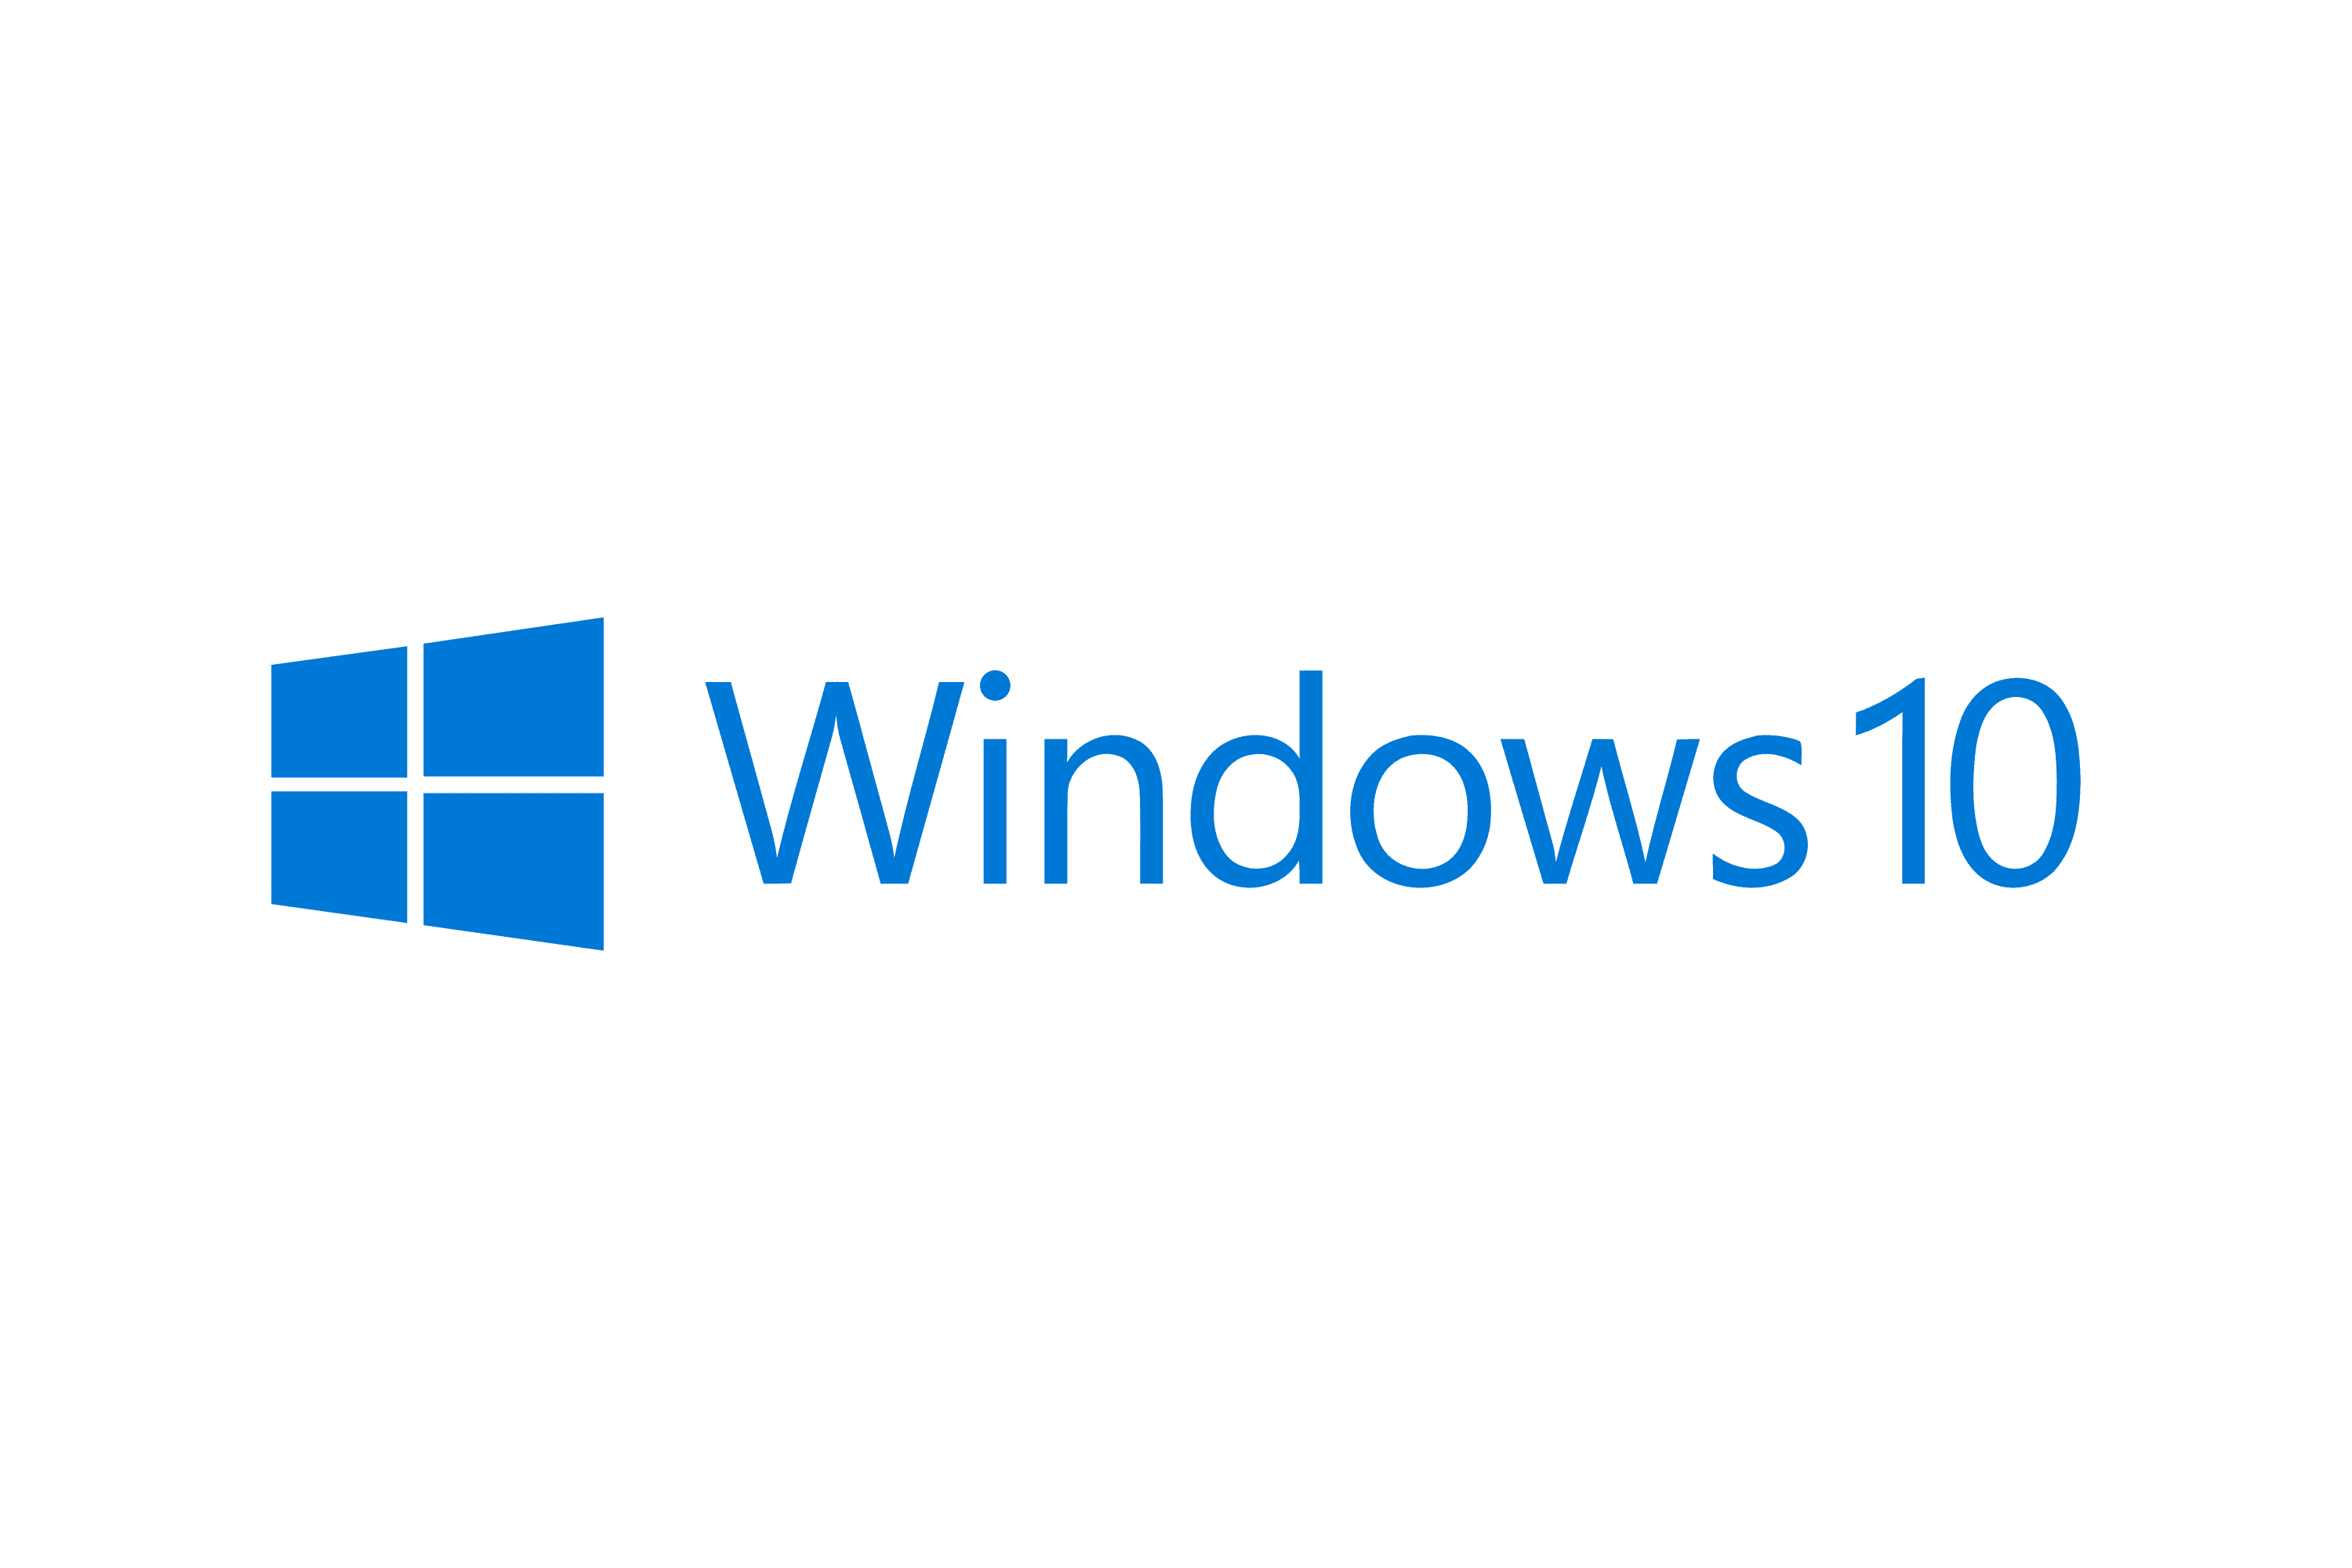 Microsoft reiterates upcoming Windows 10 21H1 end of service in December